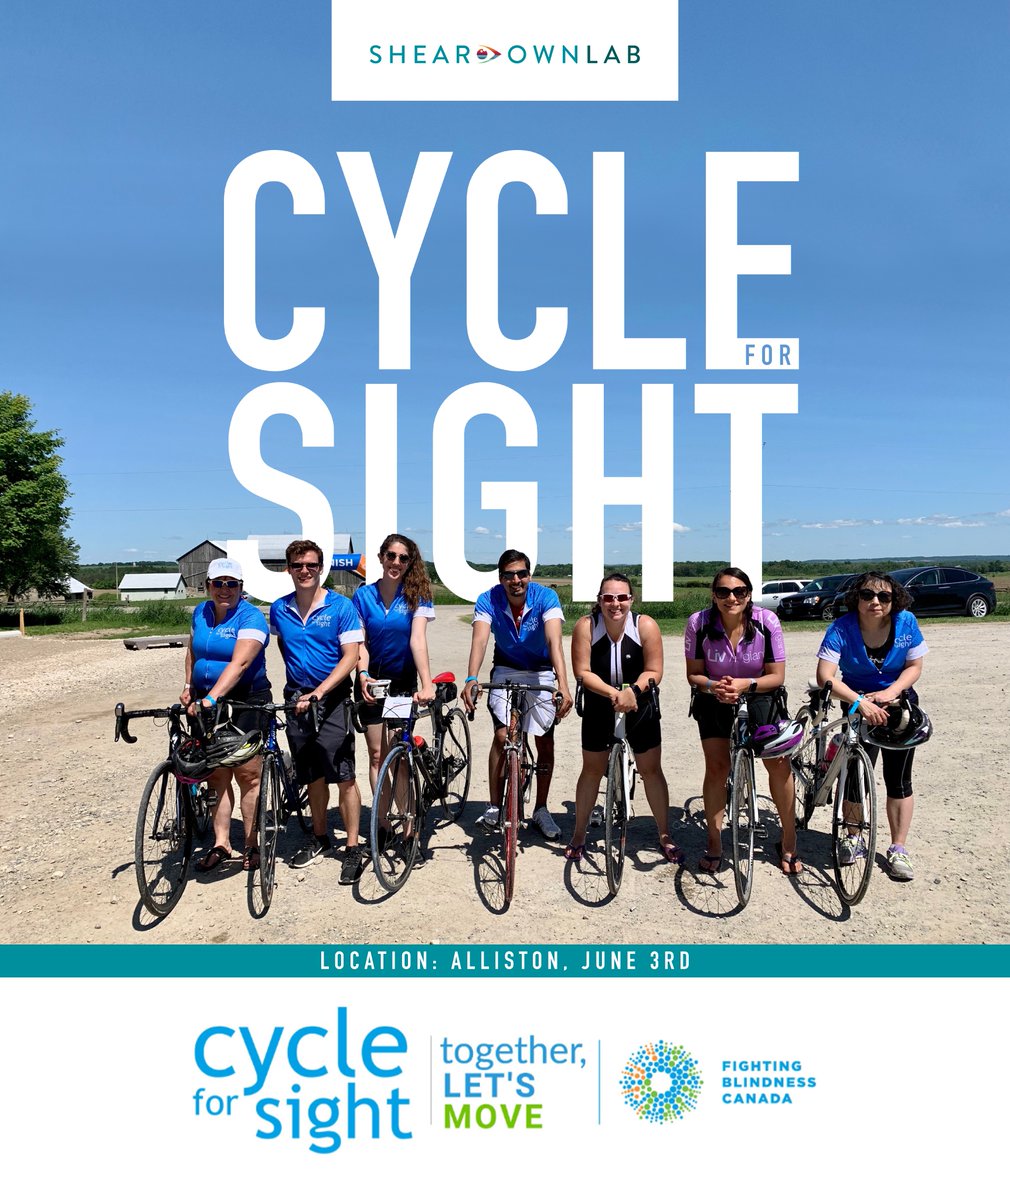 On June 3rd, The Sheardown Lab will be riding and raising funds to give millions of Canadians, who are living with vision loss, access to vision saving treatments. To make a secure online donation just click this link. fightingblindness.akaraisin.com/ui/cycleforsig…
#CycleforSight #FightingBlindness